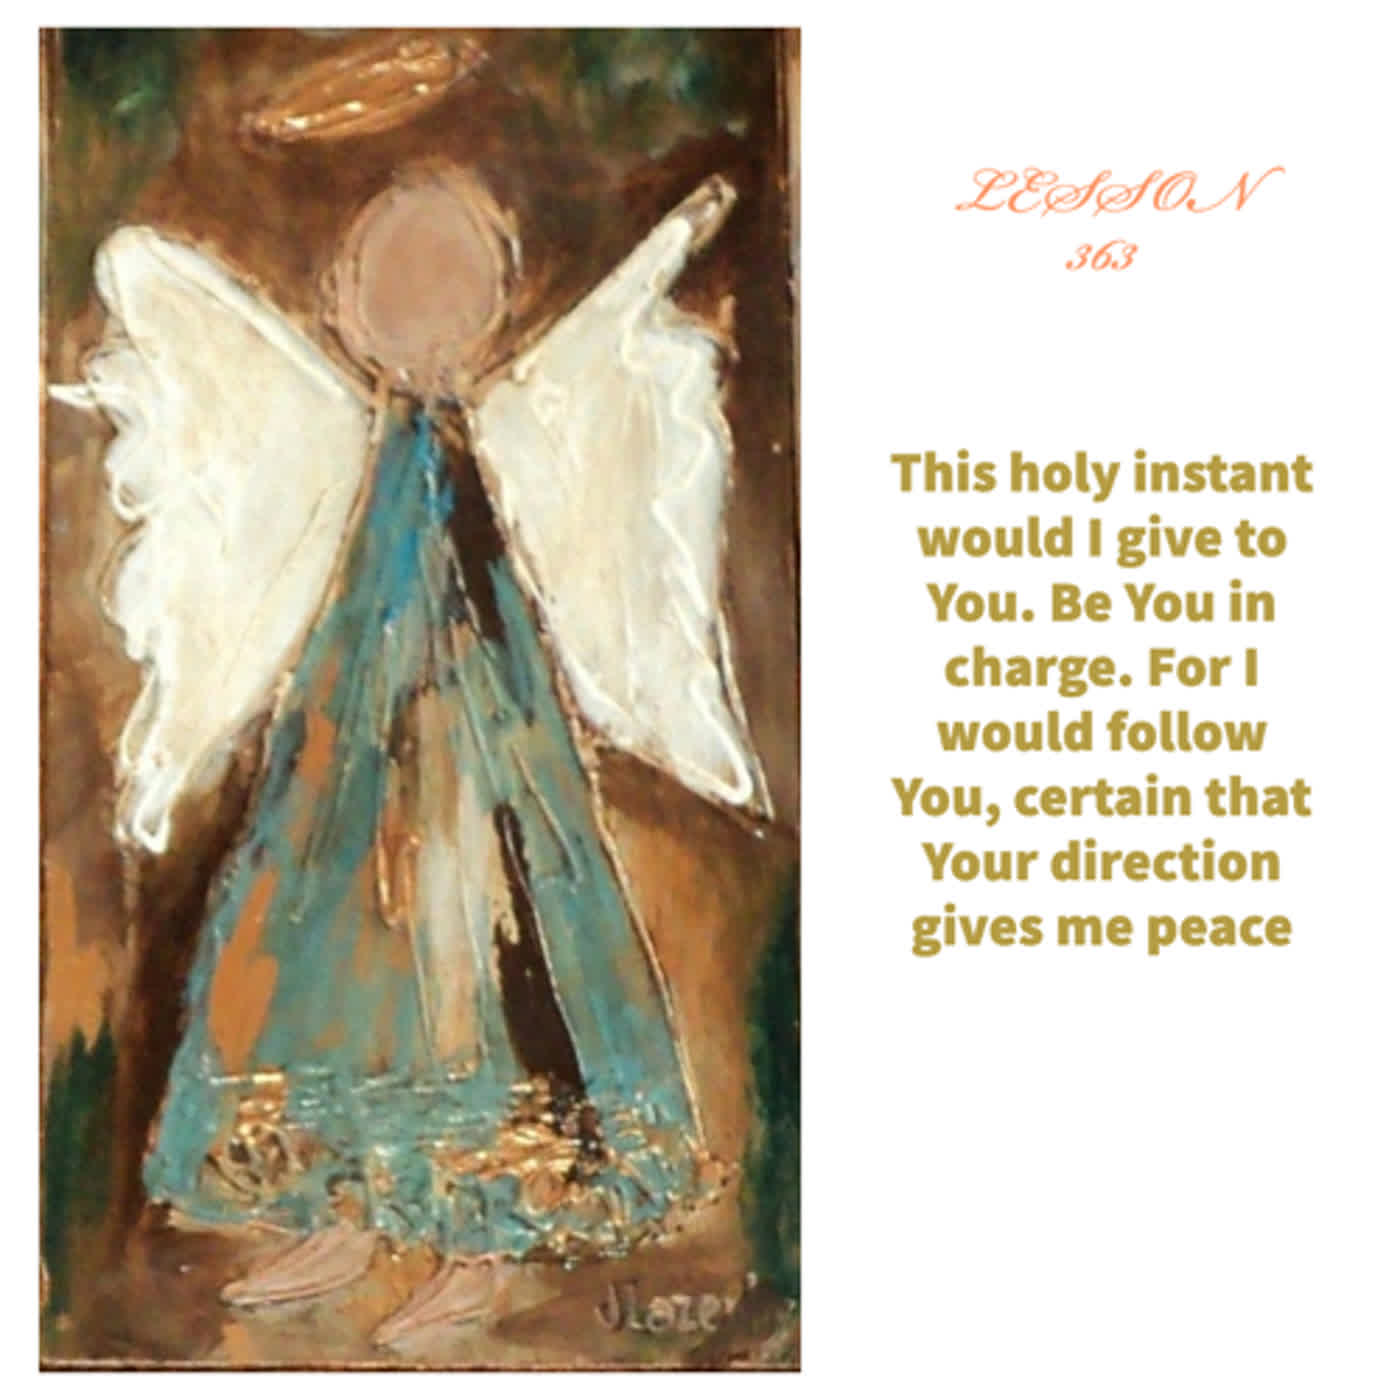 Lessons 363  This holy instant would I give to You. Be You in charge. For I would follow You, certain that Your direction gives me peace